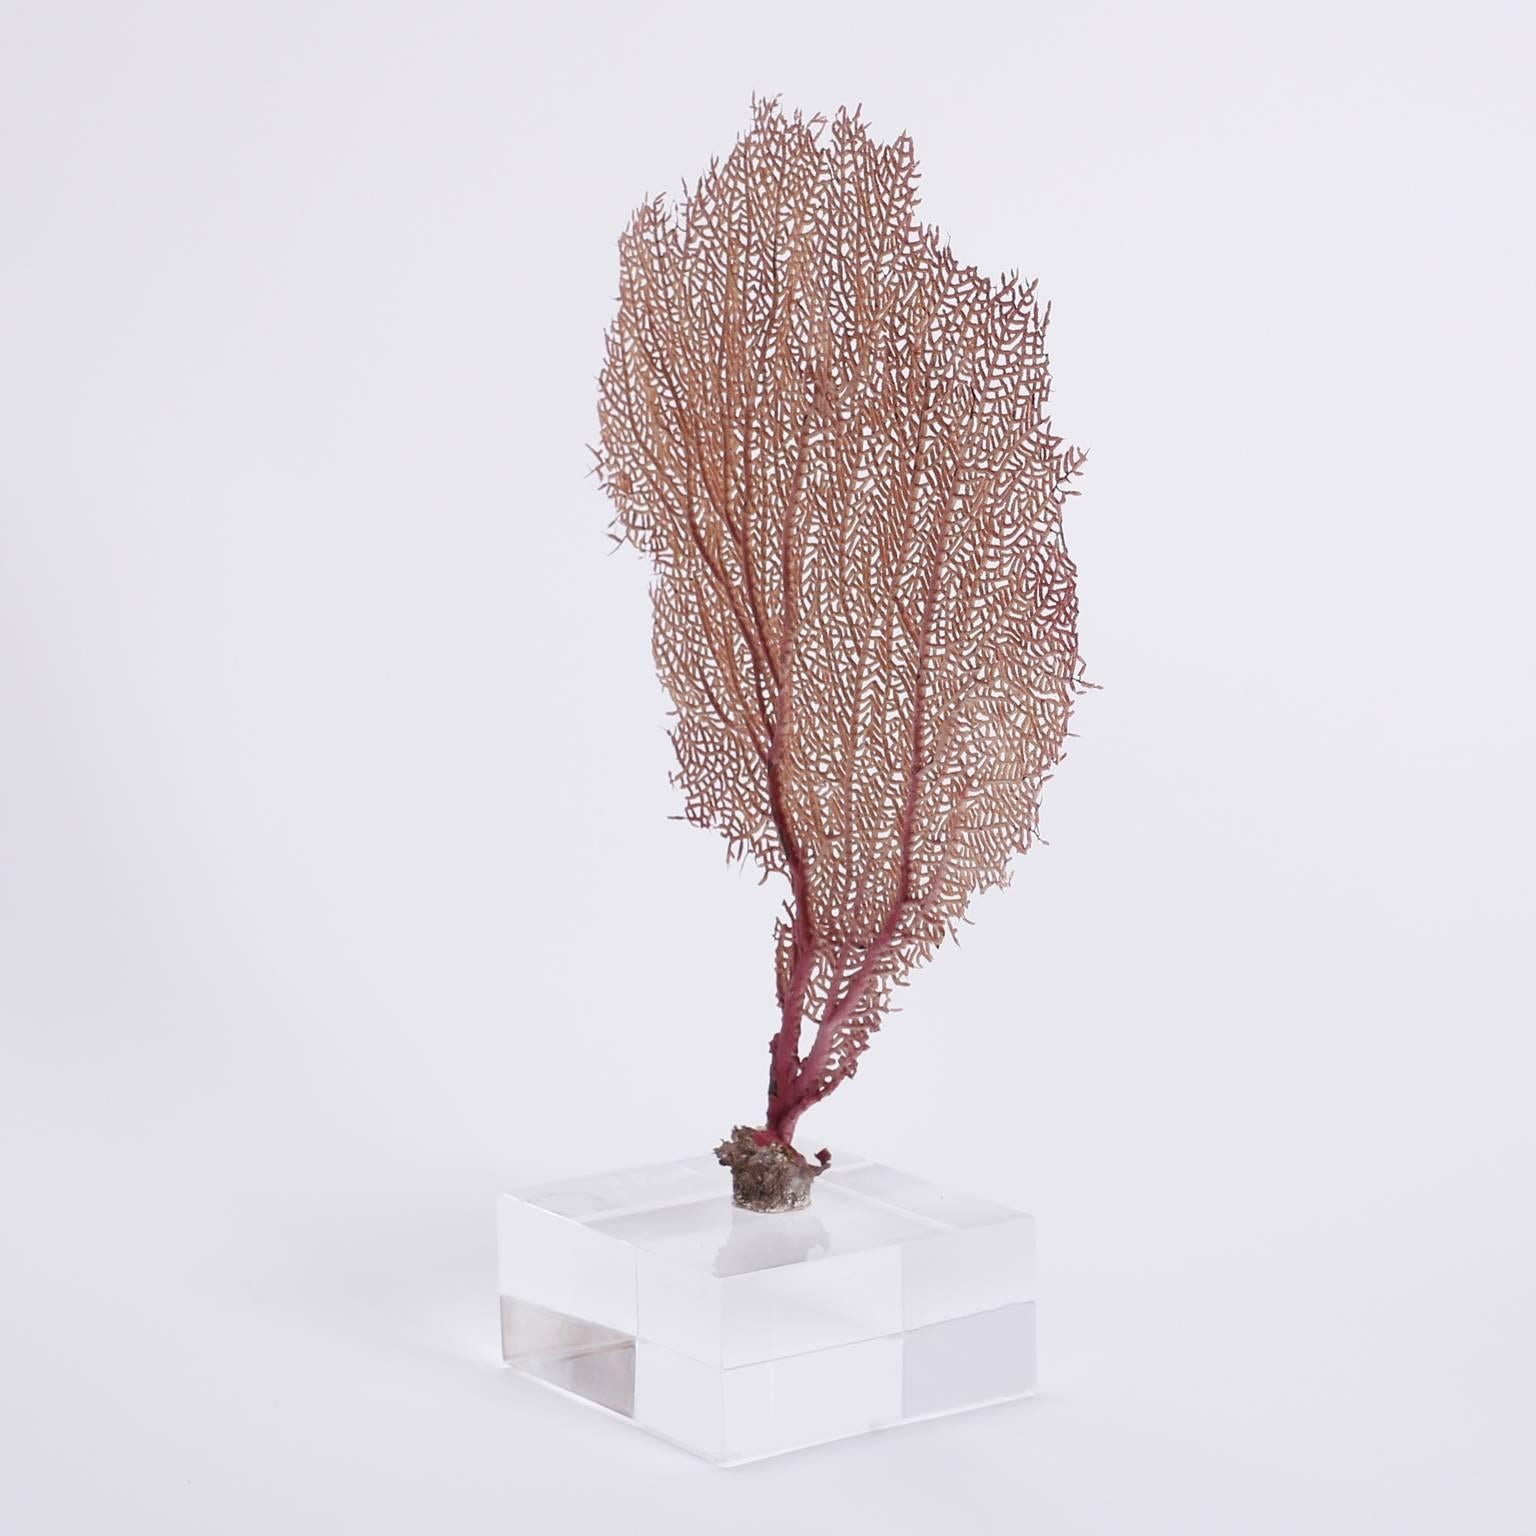 Purple Bahama sea fan with an alluring sculptural form presented on a thick Lucite block.